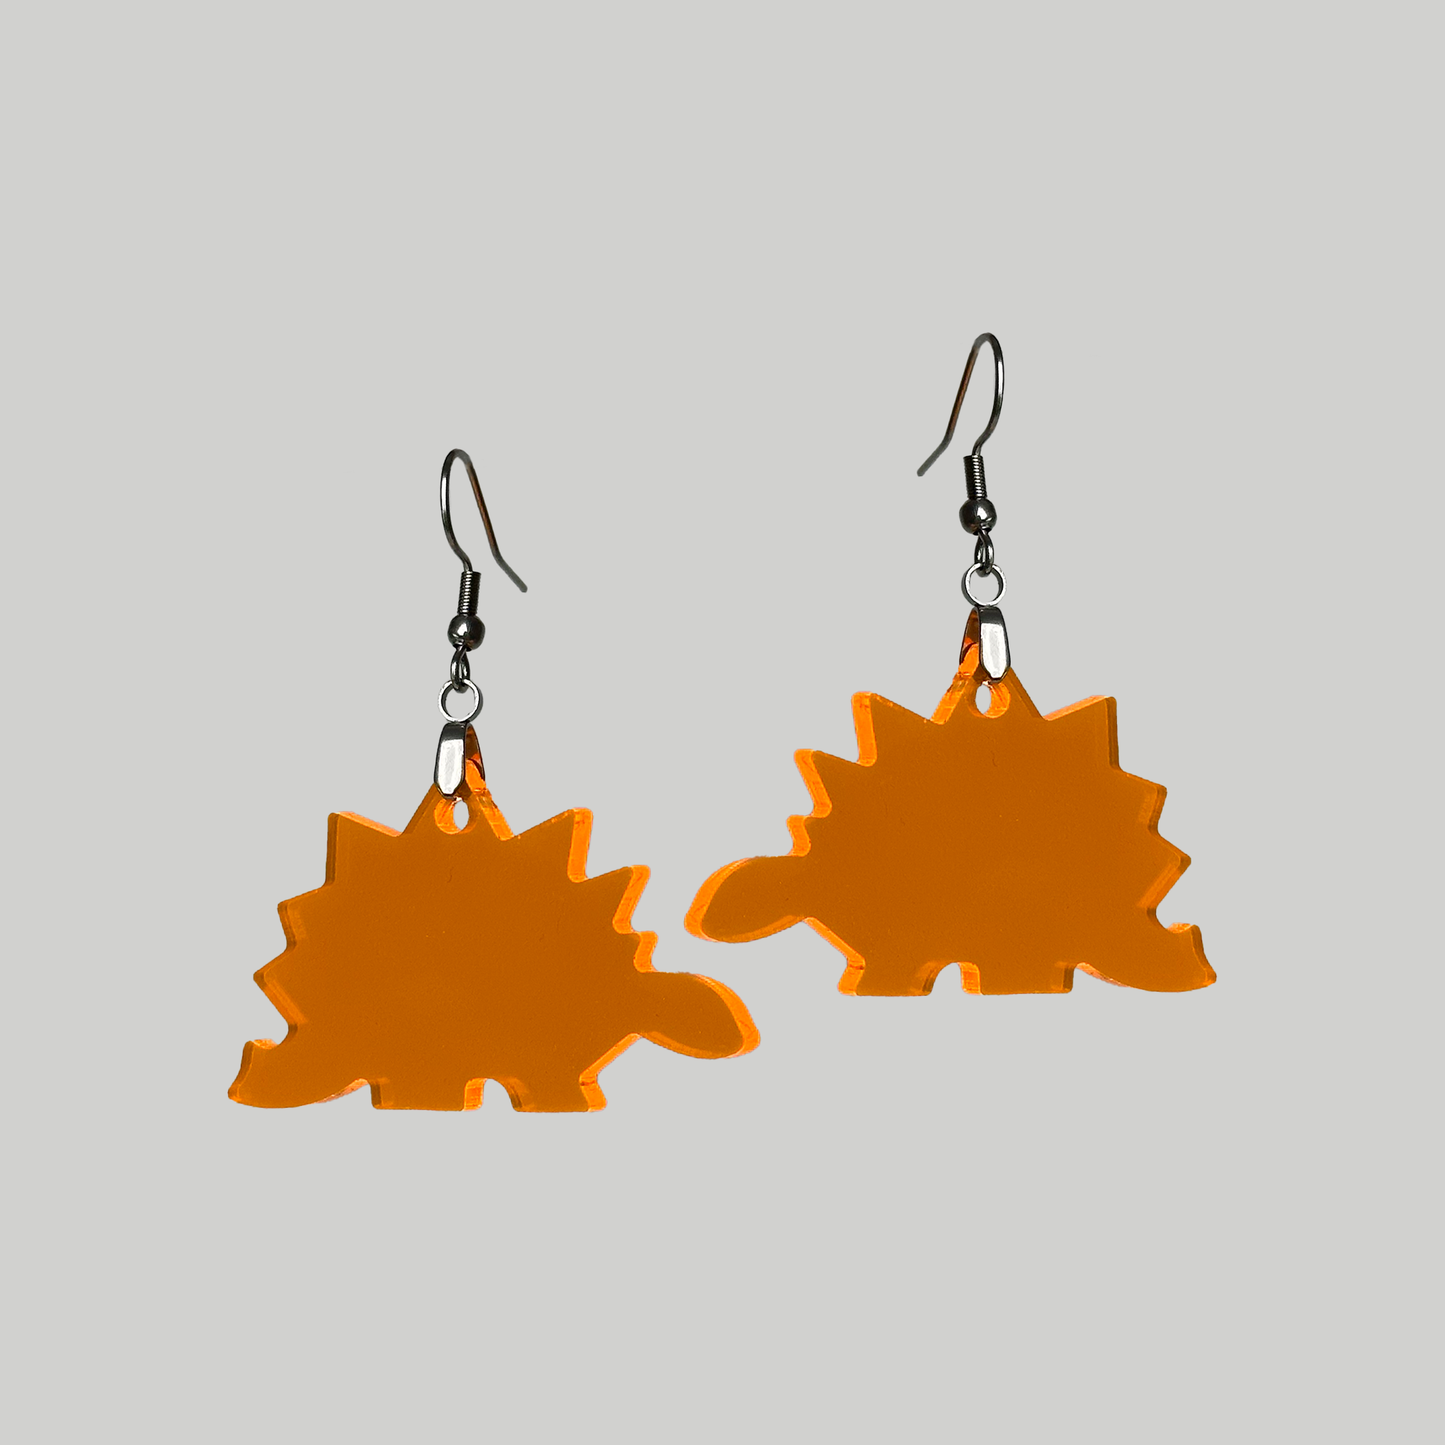 Earrings shaped like a stegosaurus dinosaur, designed in fluorescent orange for a vibrant and standout look everywhere.